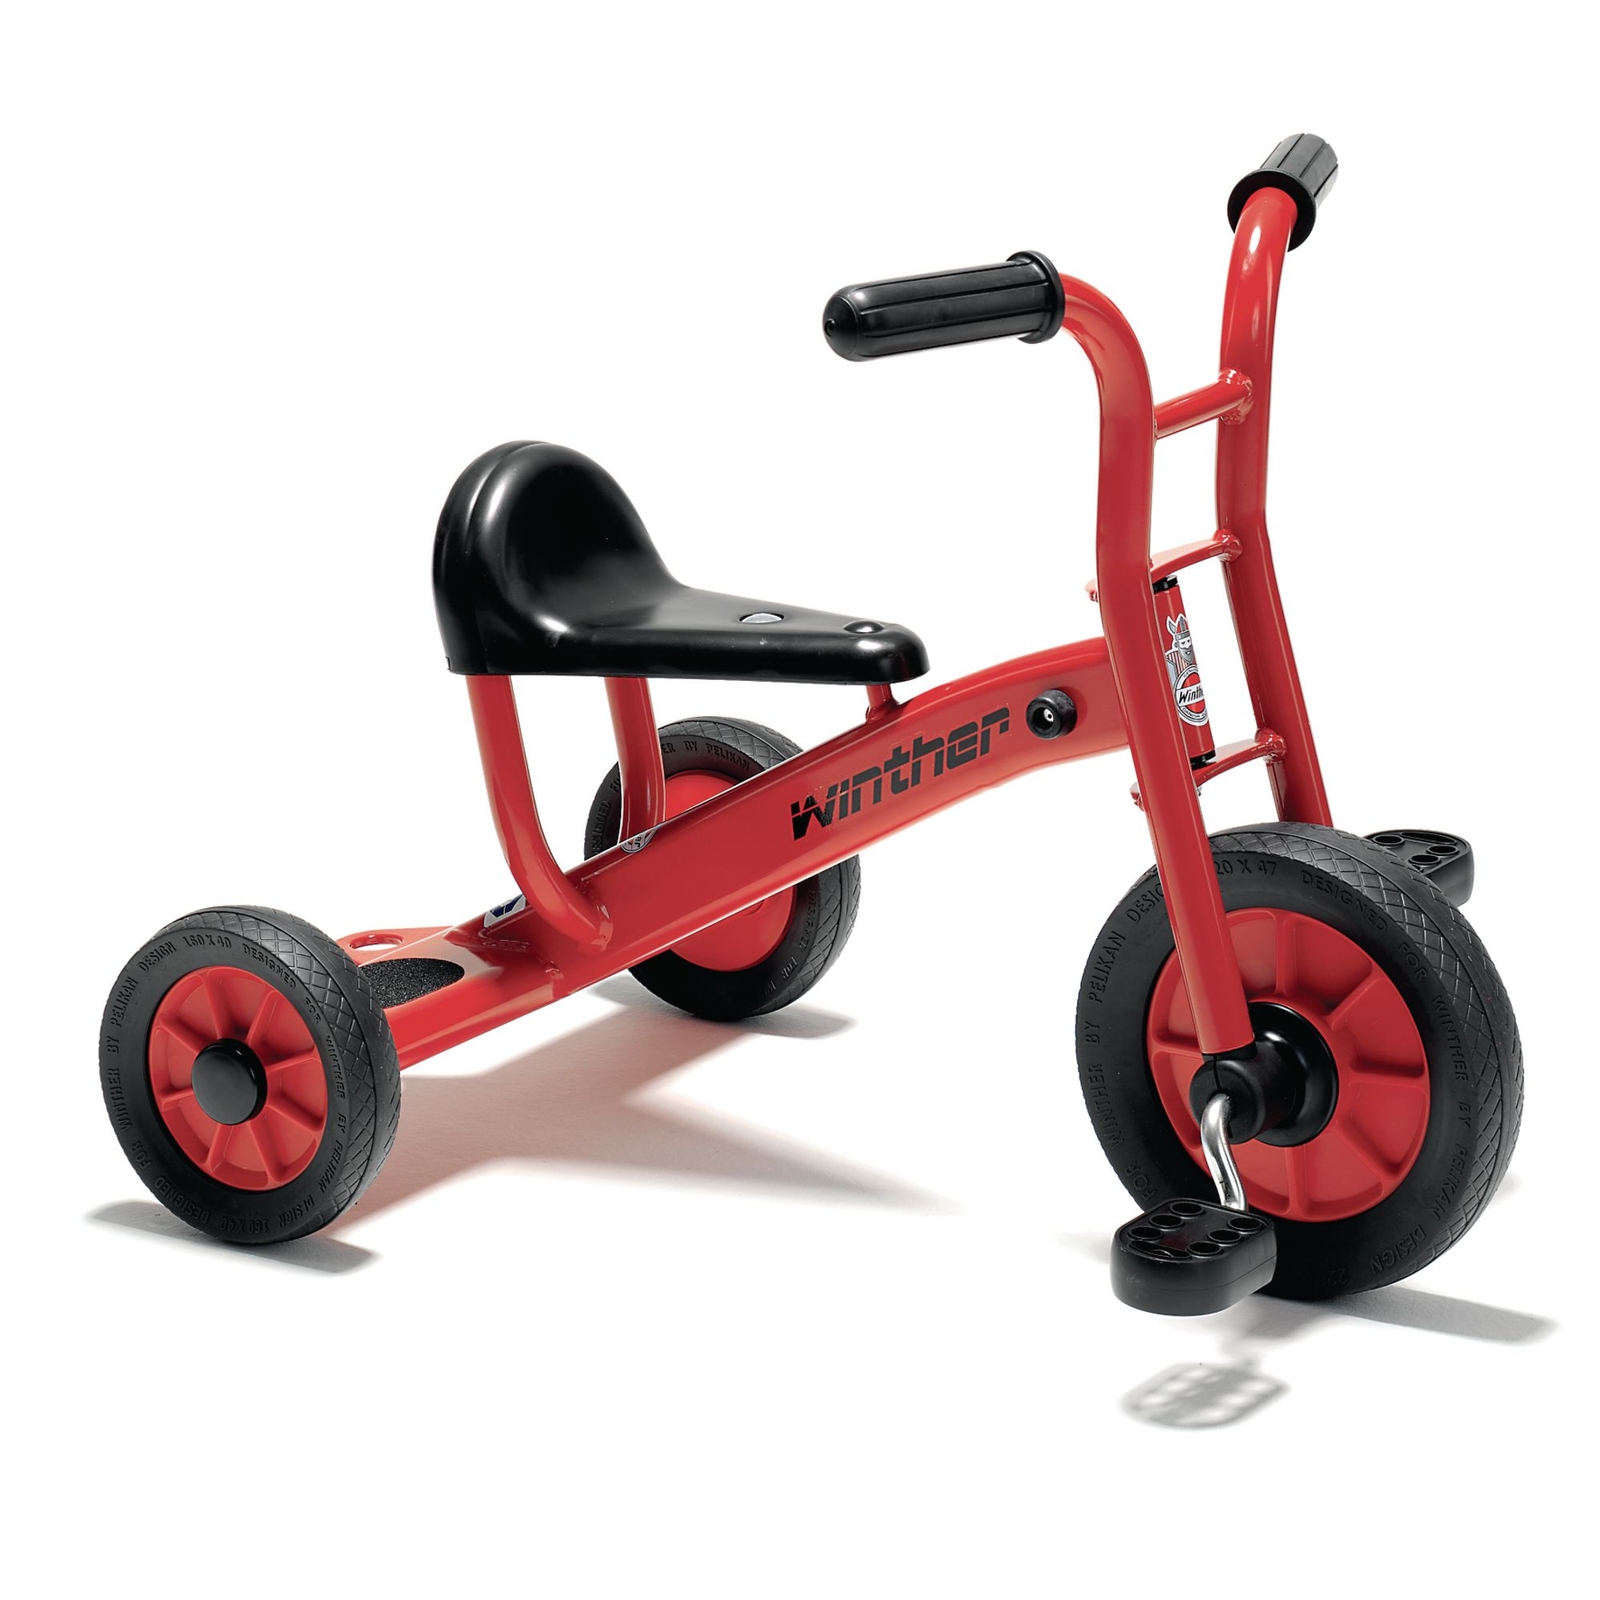 Winther Medium Tricycle - L810 x W350 x H620 - Each